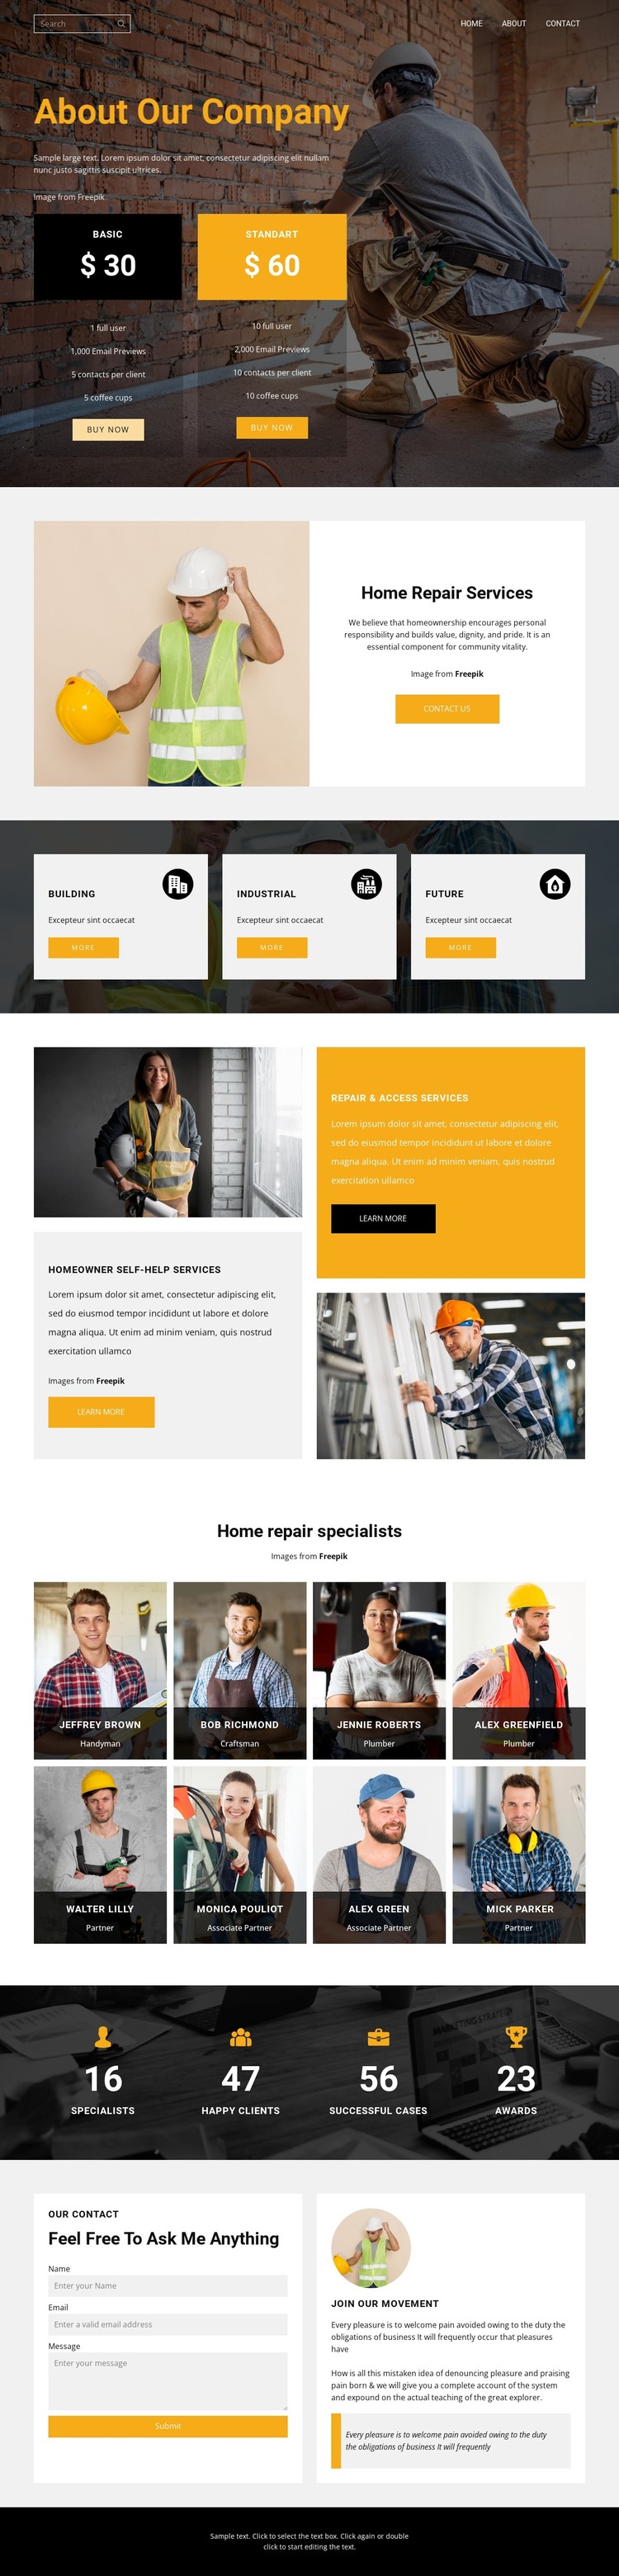 We will build a better home WordPress Theme